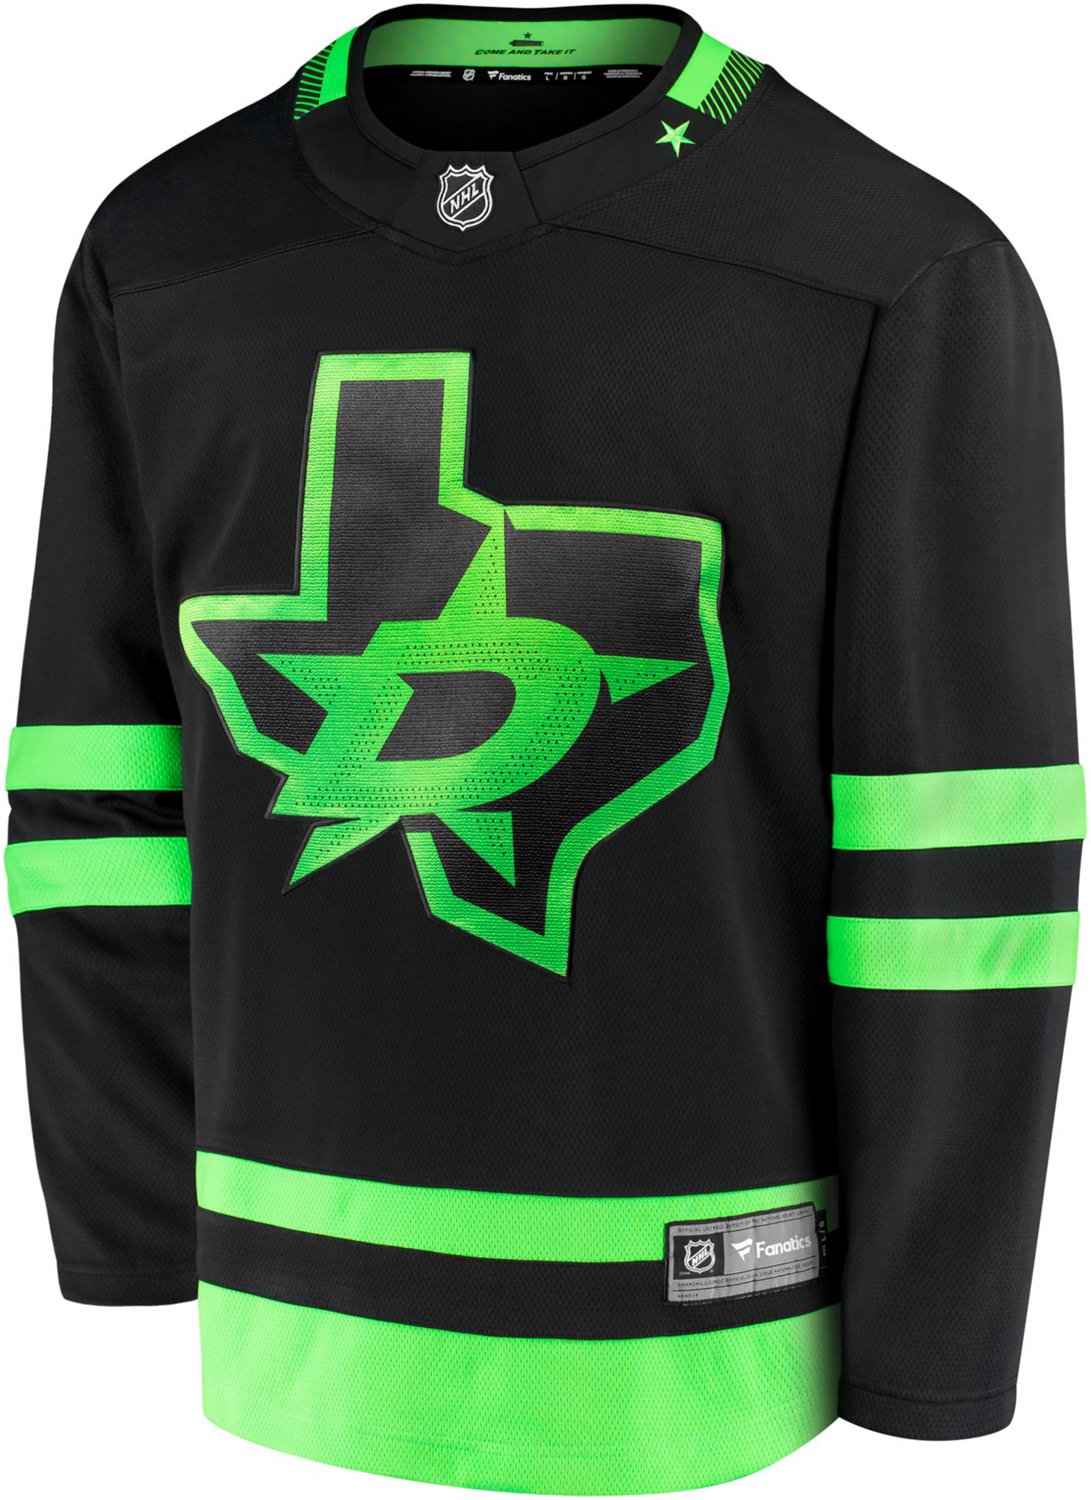 The Stars' new alternate jerseys are inspired by the Dallas